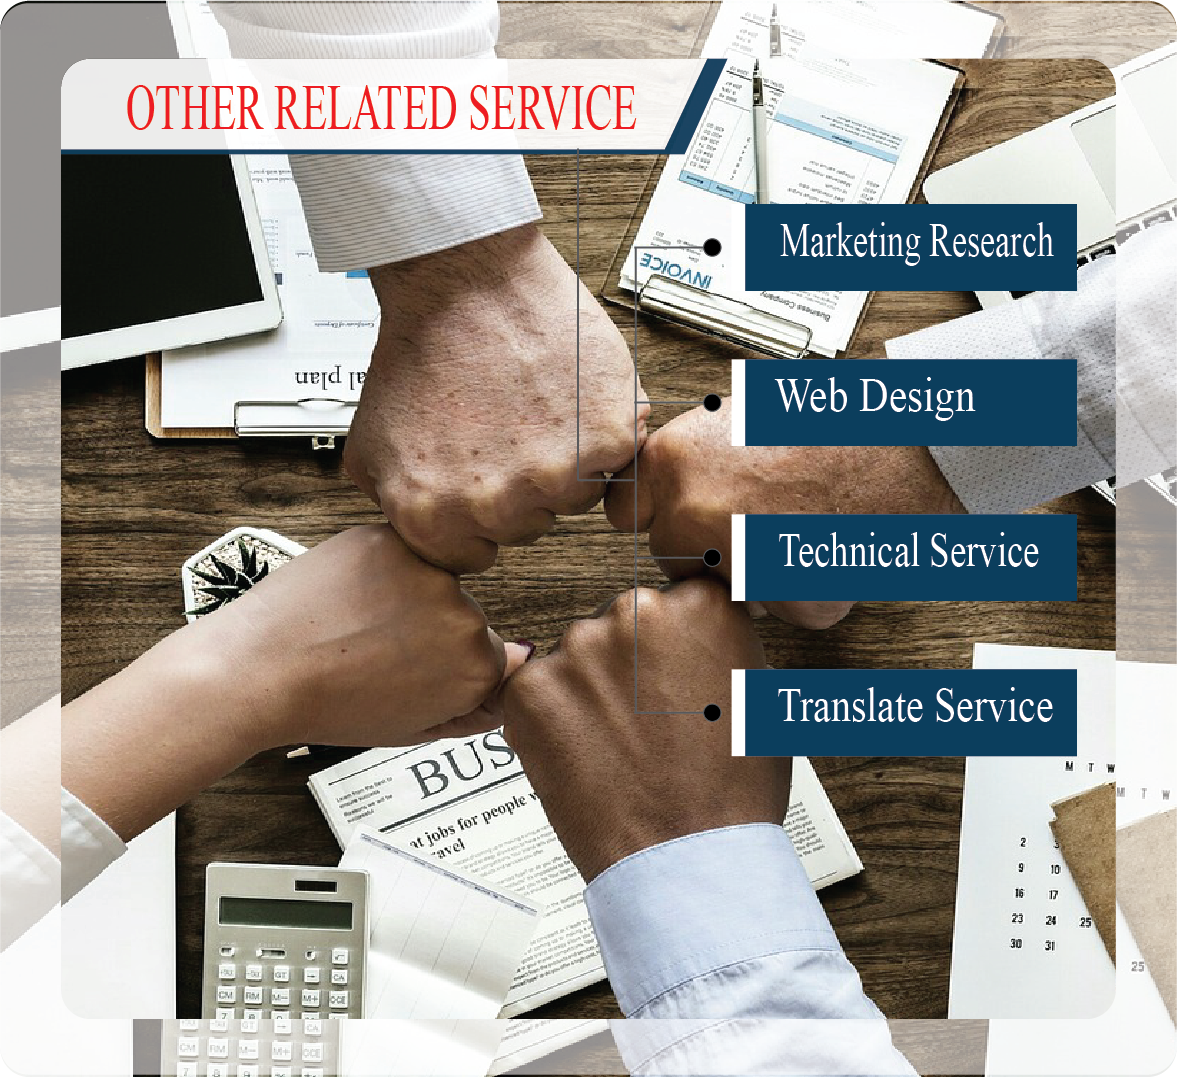 Other Related Services